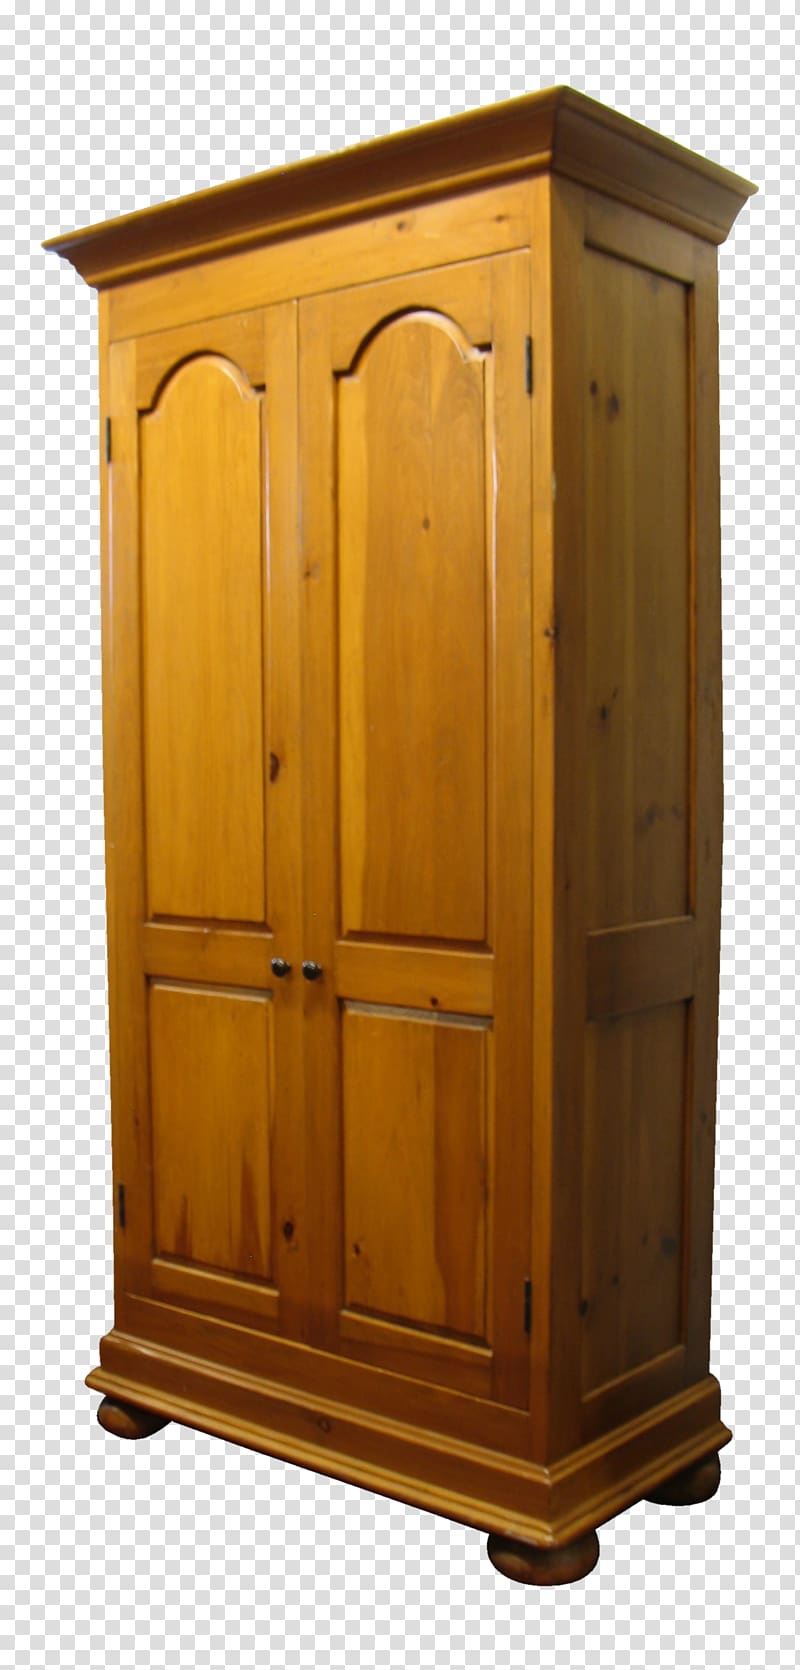 Armoires & Wardrobes Chiffonier Cupboard Wood stain Cabinetry, wooden guardrail transparent background PNG clipart